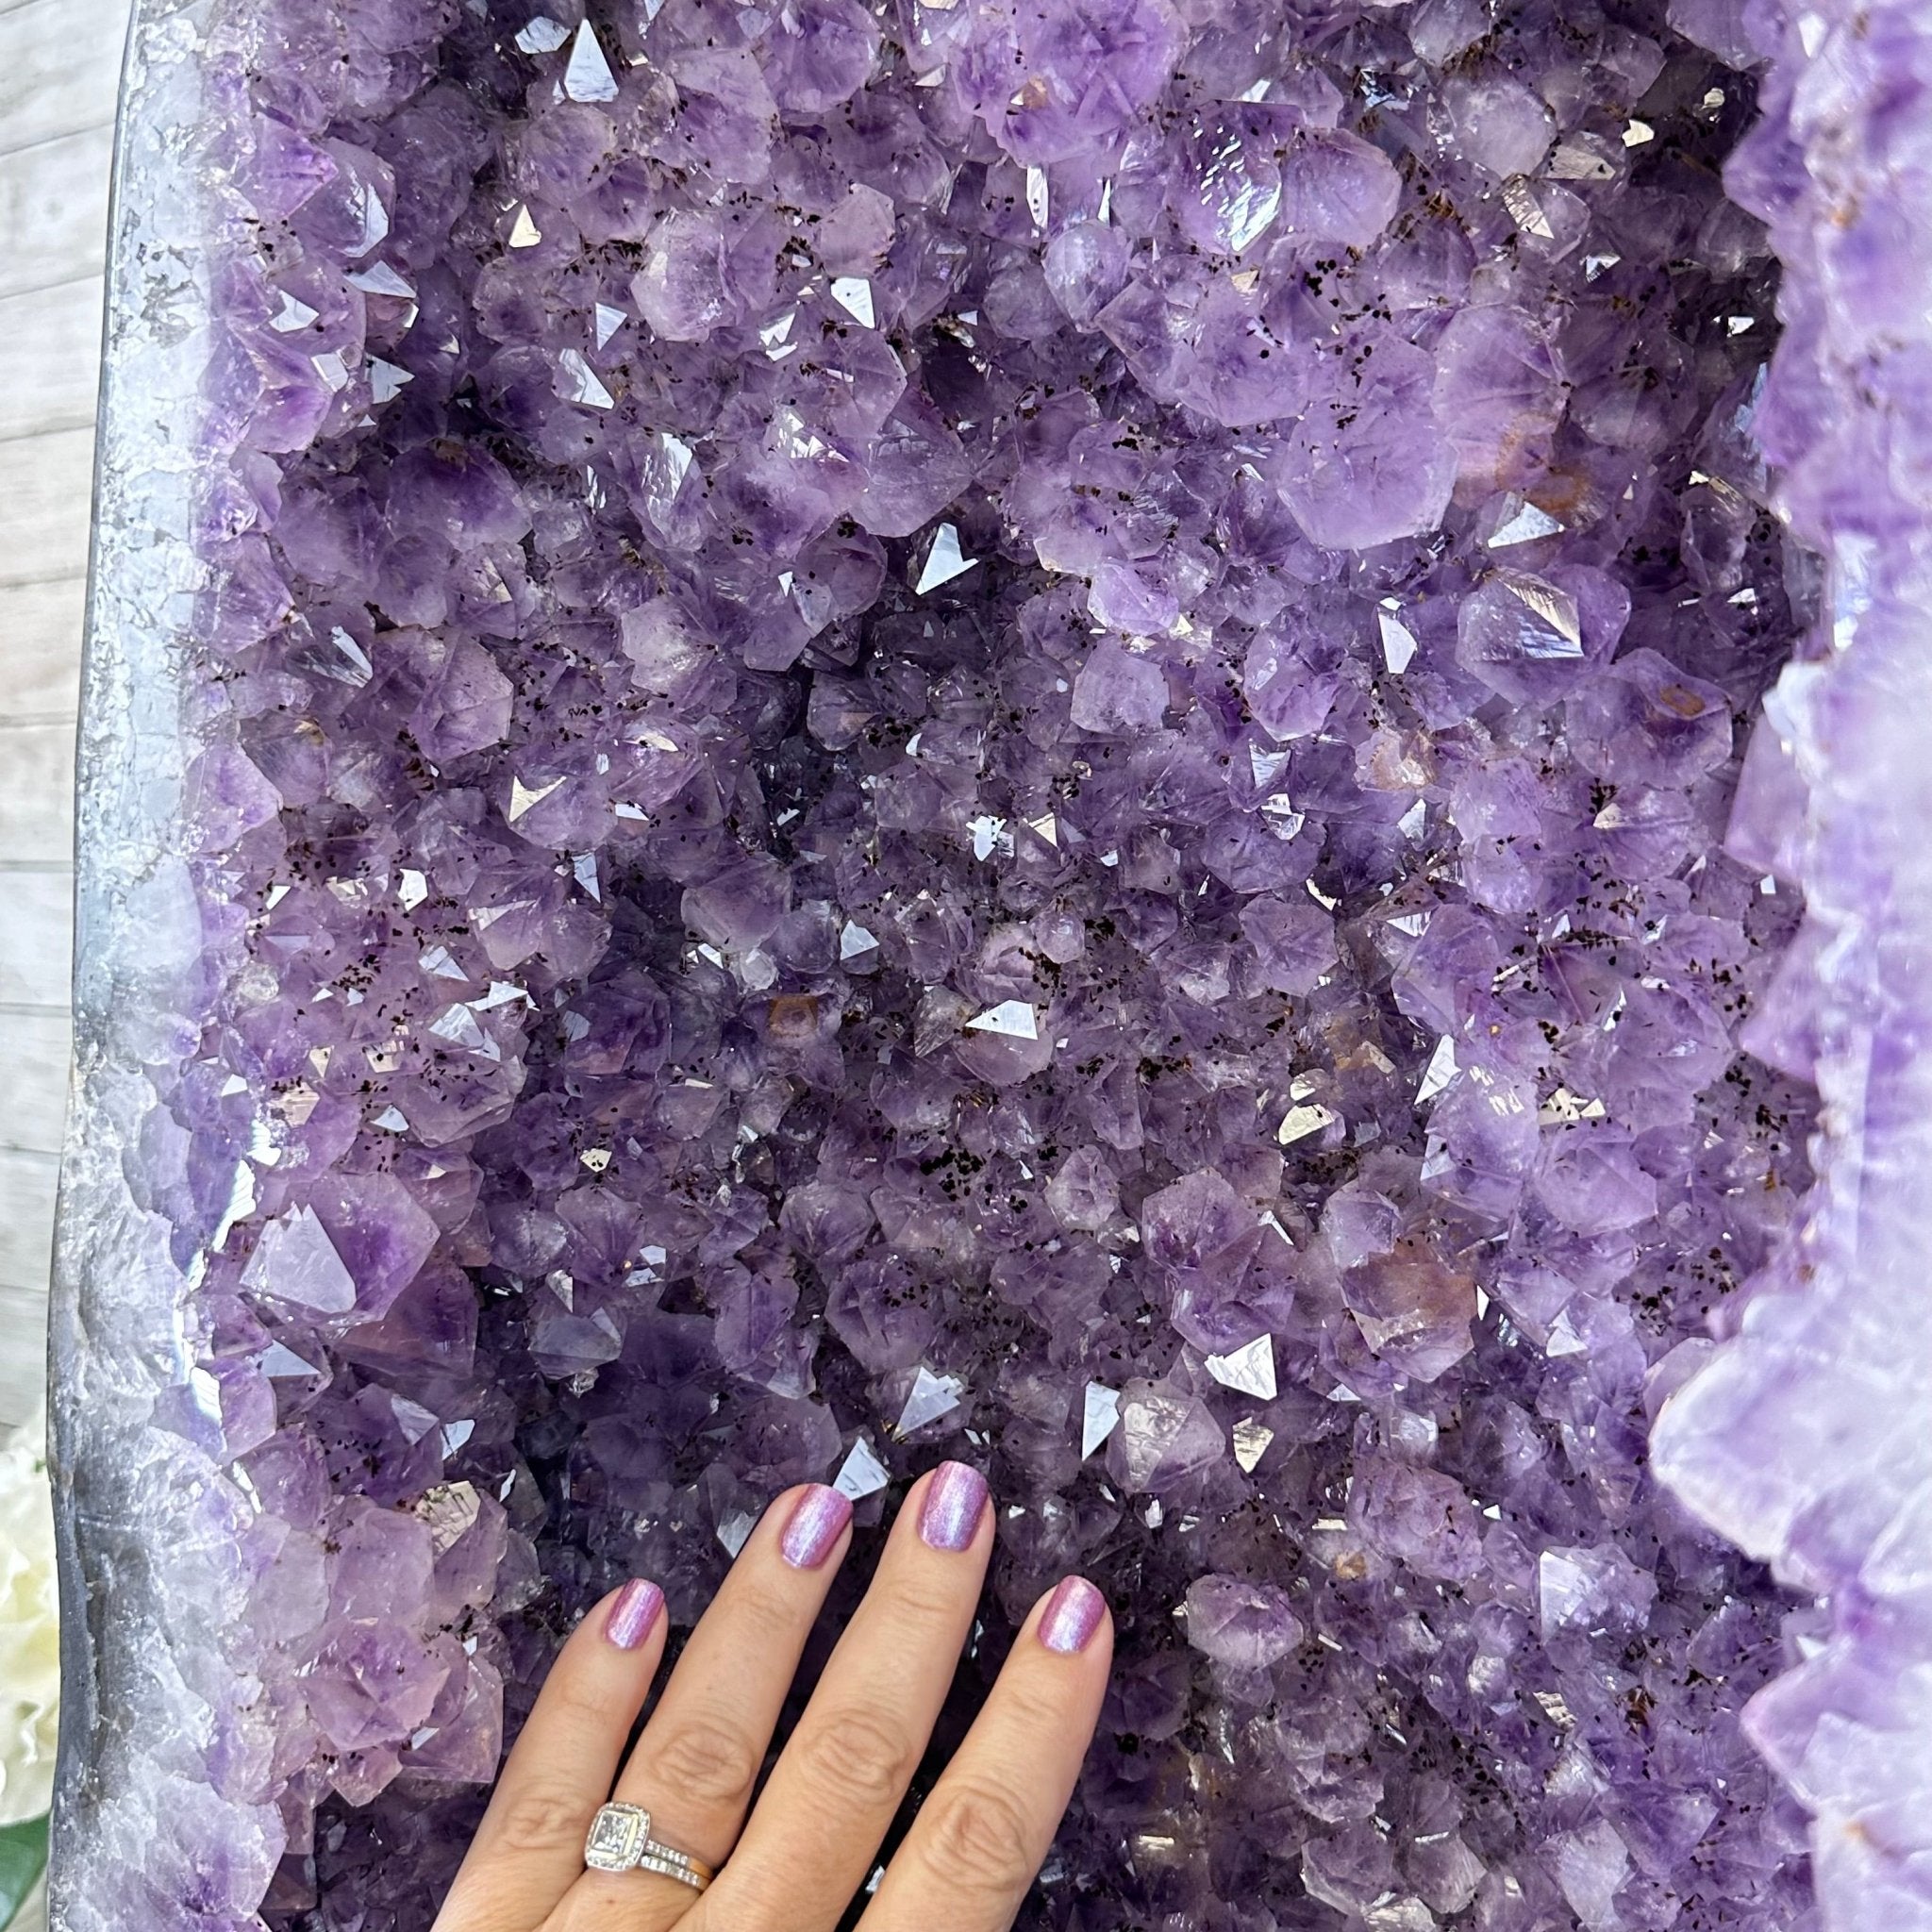 Extra Quality Brazilian Amethyst Cathedral, 510 lbs & 70" Tall #5601-1335 - Brazil GemsBrazil GemsExtra Quality Brazilian Amethyst Cathedral, 510 lbs & 70" Tall #5601-1335Cathedrals5601-1335